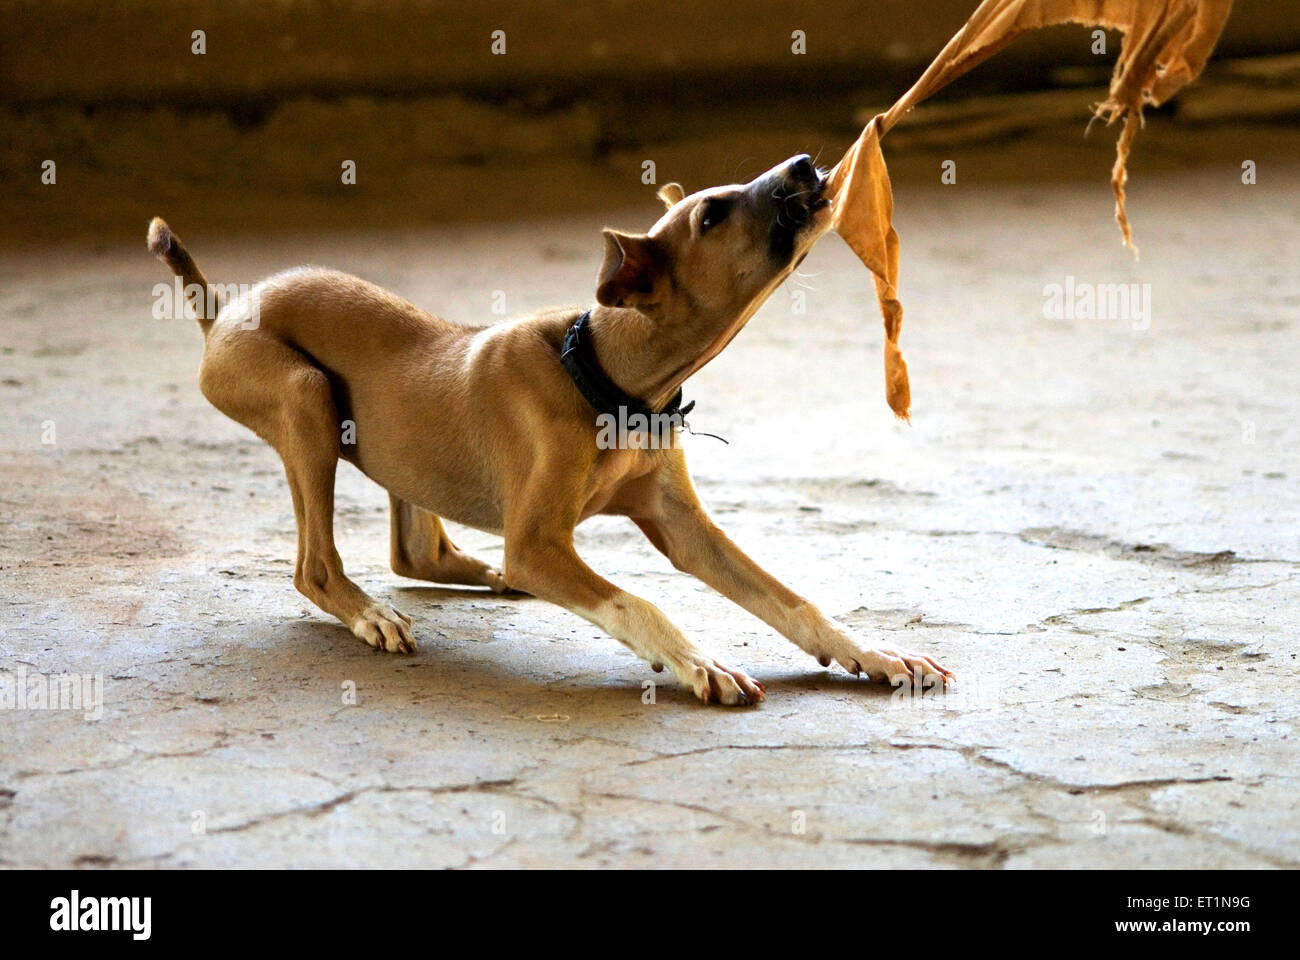 Small dog or puppy in playing mood and trying to catch cloth Stock Photo